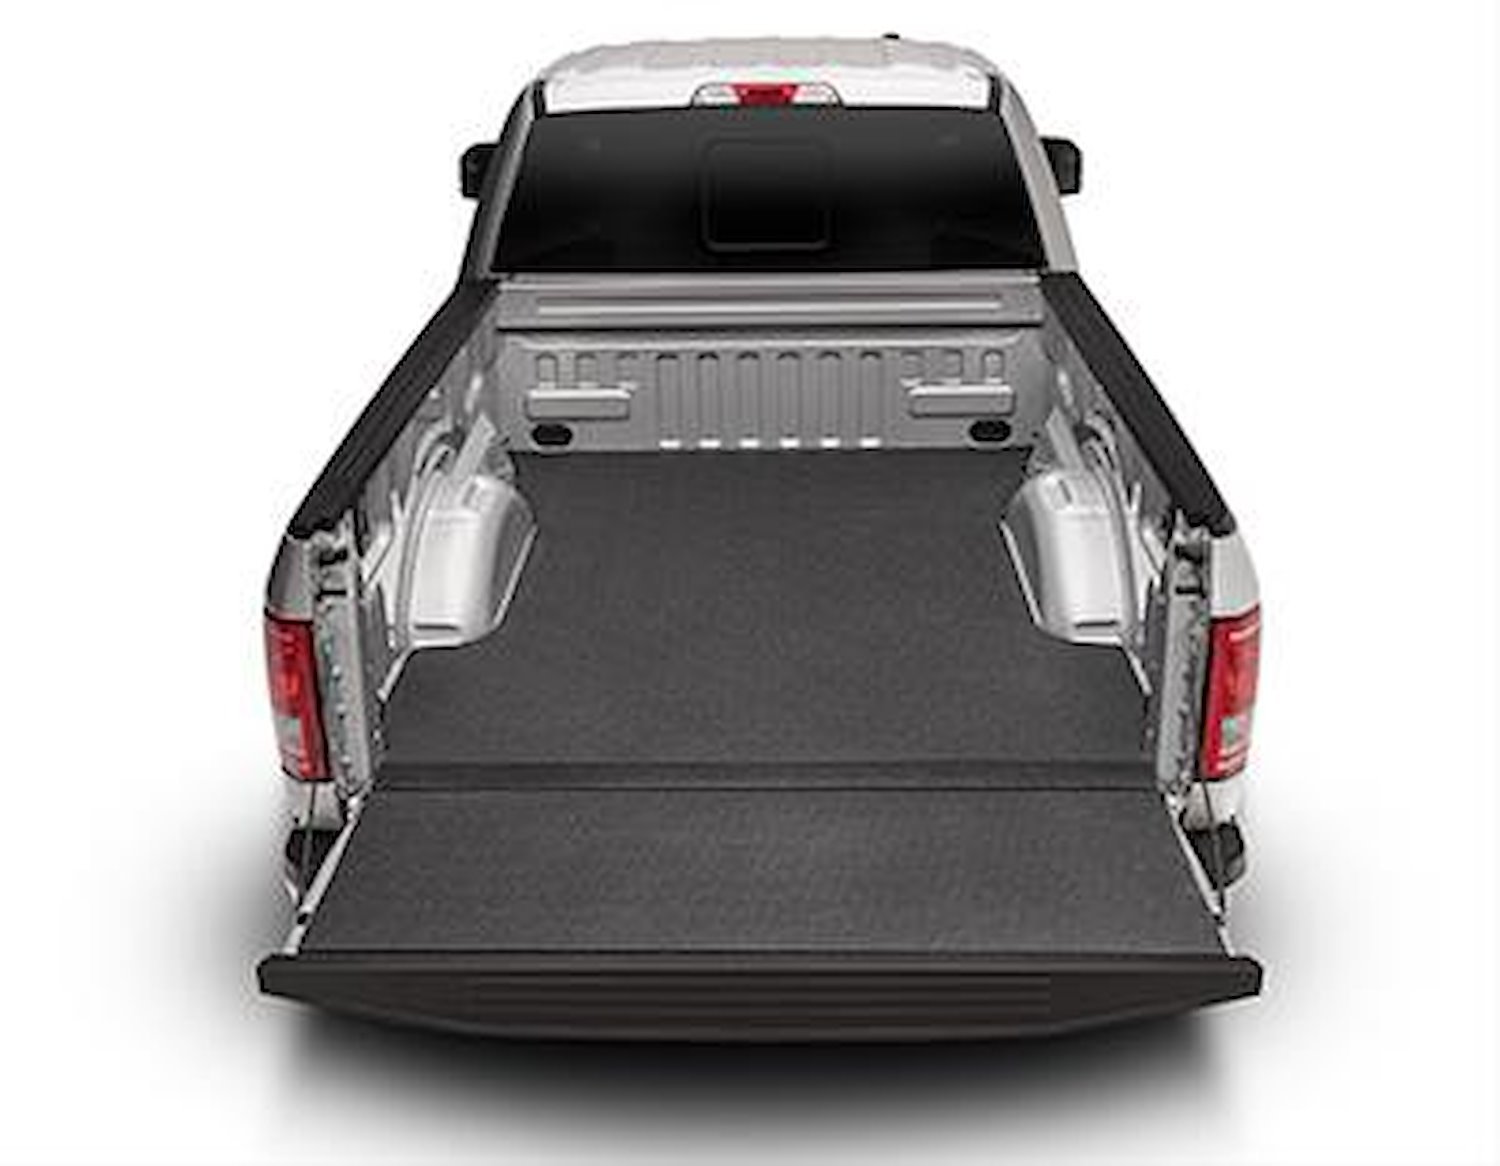 IMY07SBS IMPACT BEDMAT FOR SPRAY-IN OR NO BED LINER 07-21 TOYOTA TUNDRA 5'6" BED